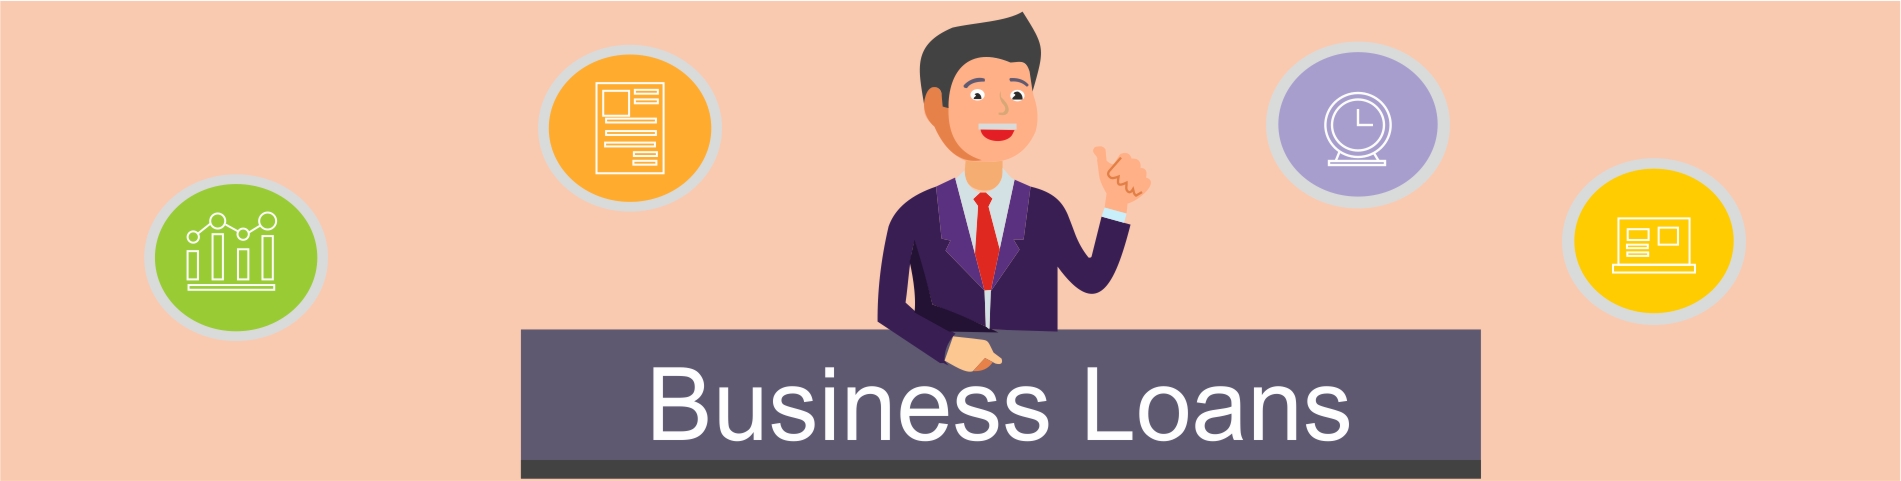 Choosing a business loan for your startup in India